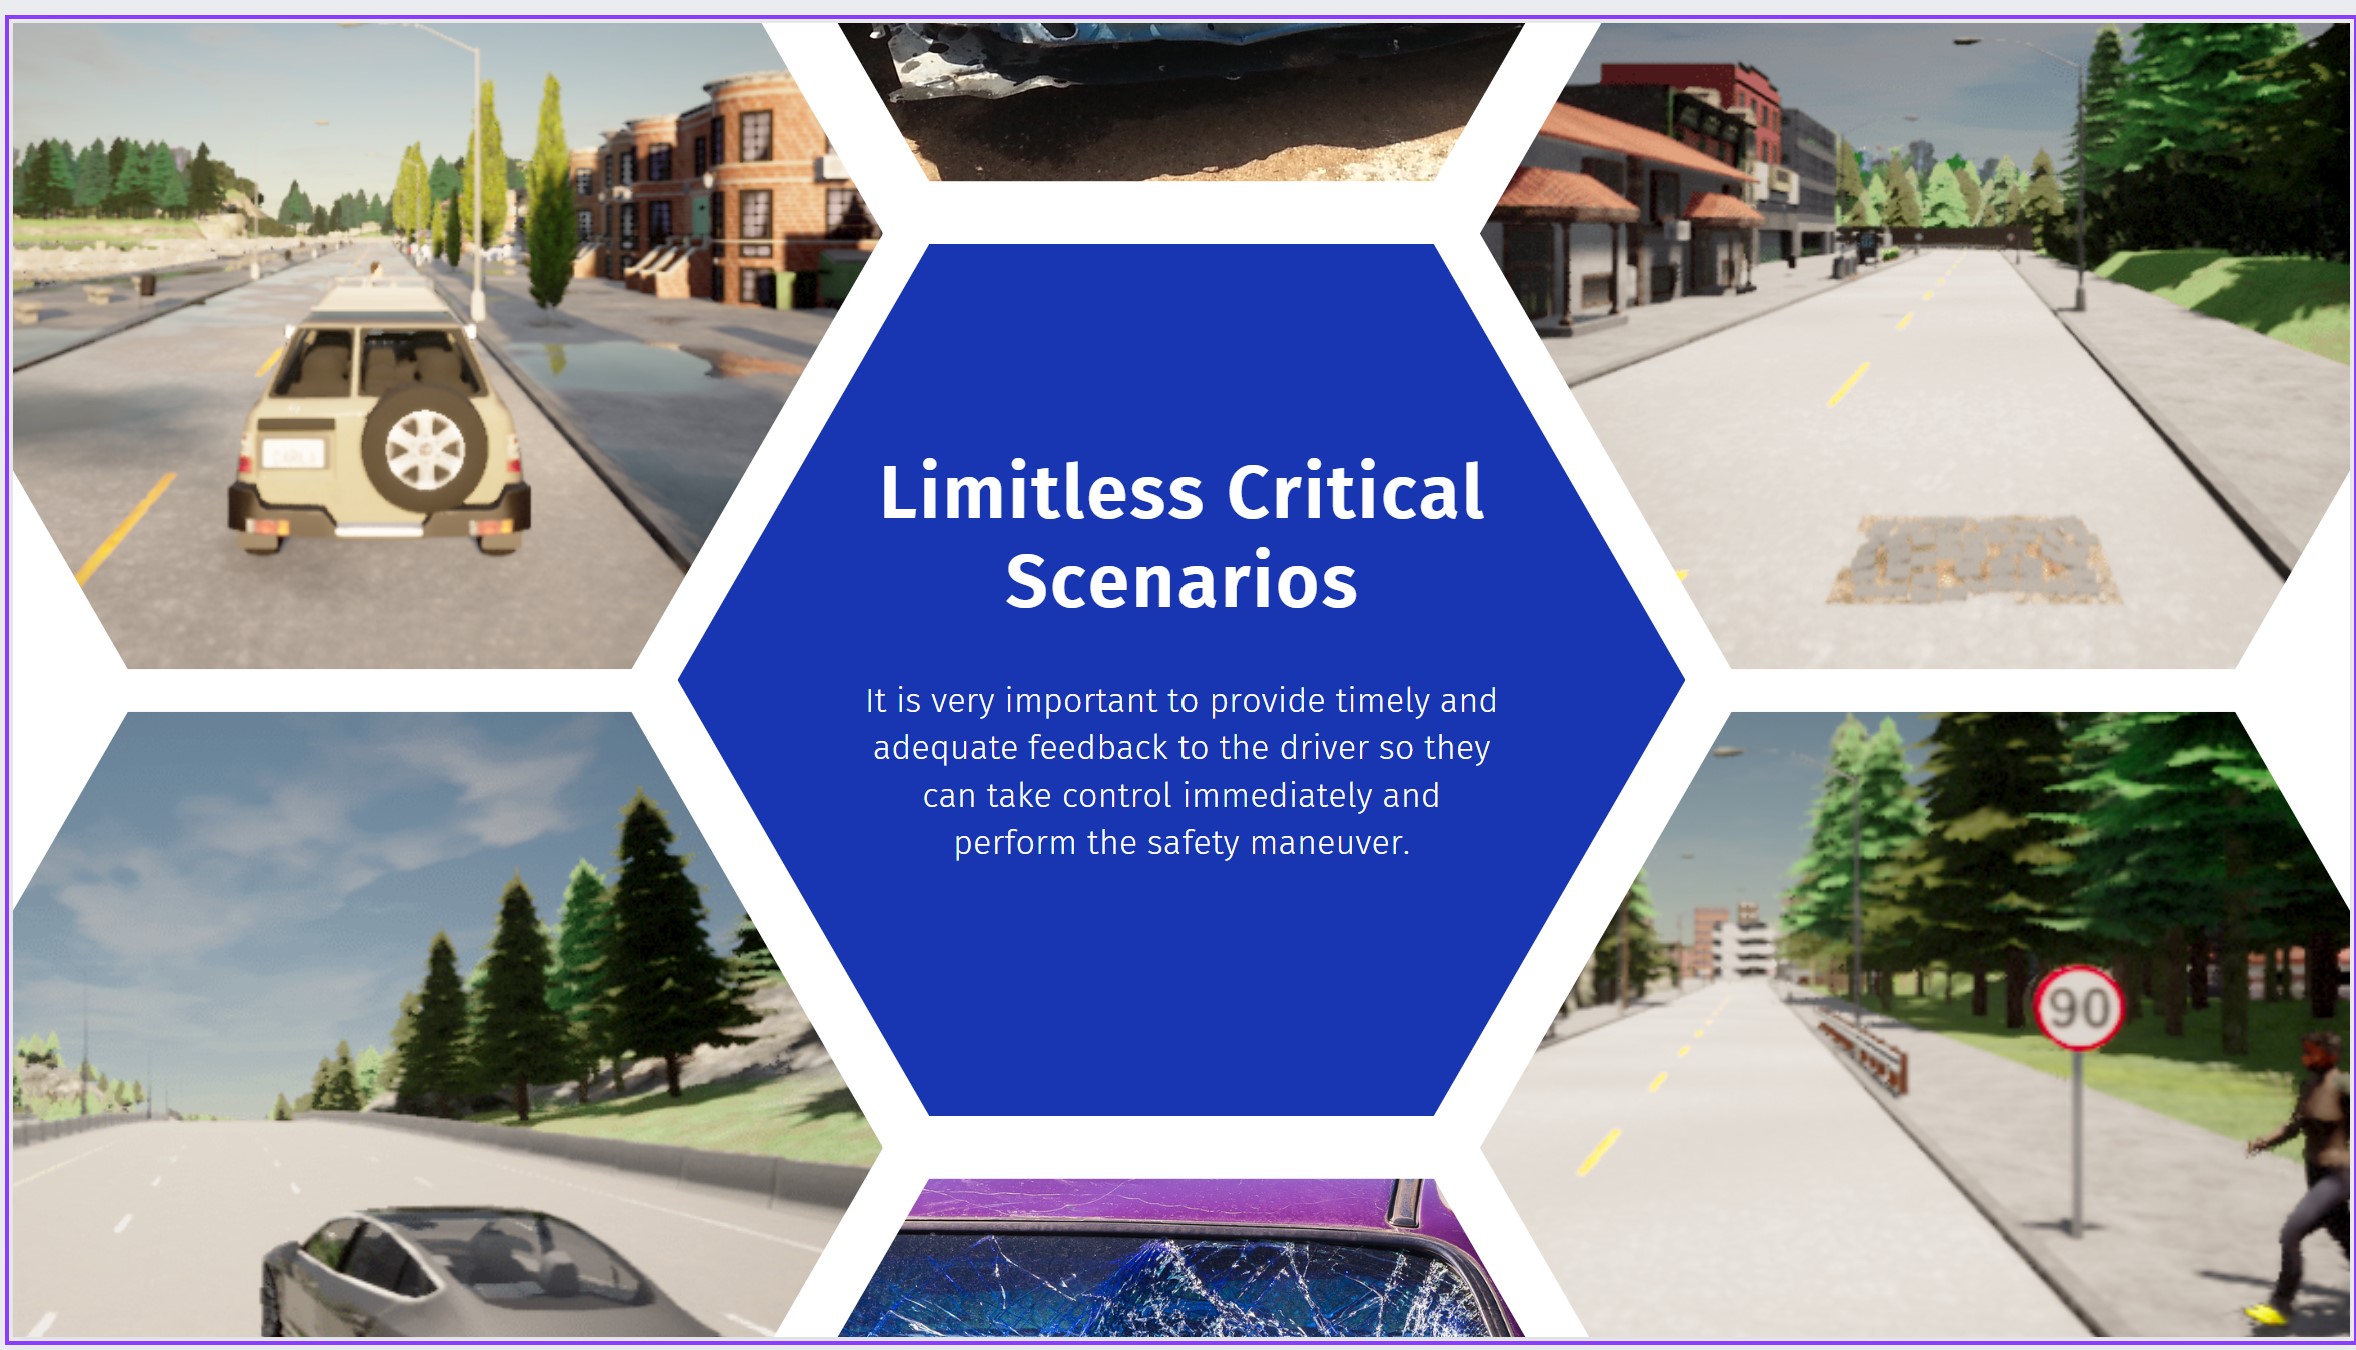 Keeping eyes on the road: the role of situated IS delegation in influencing drivers’ situational awareness